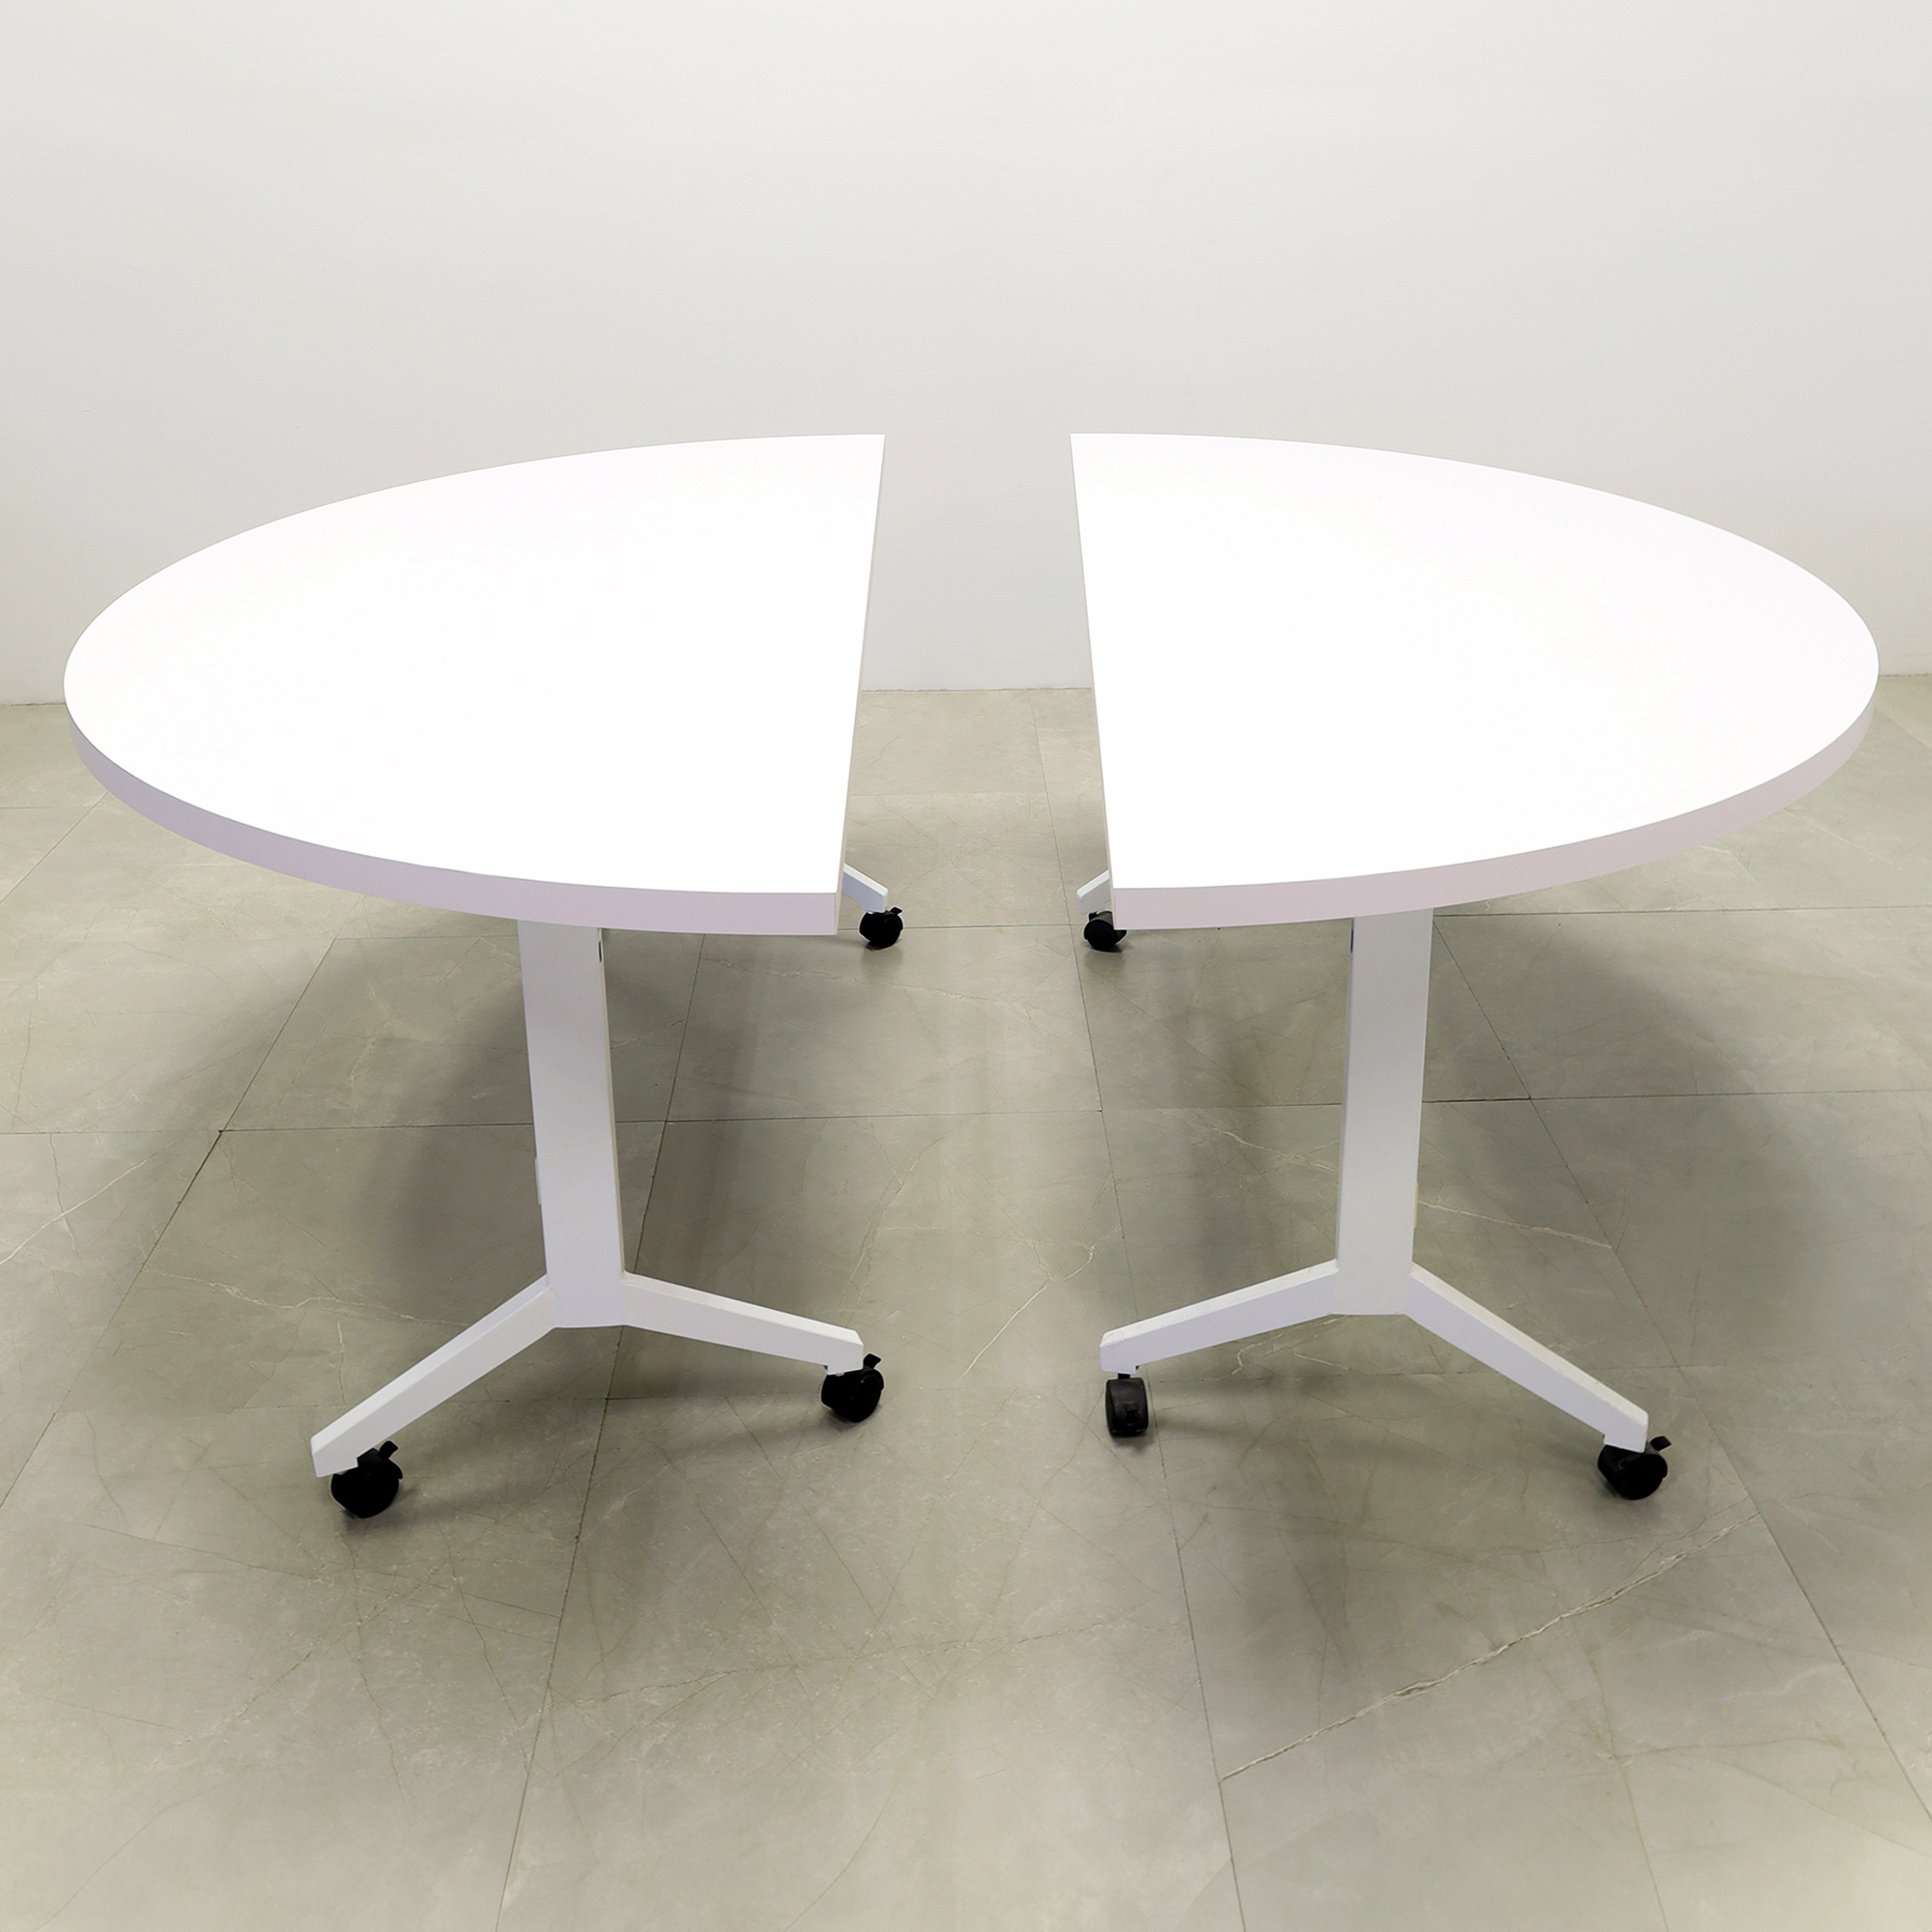 72-inch Westin Half Moon Training Table in white matte laminate top and white metal frame shown here.